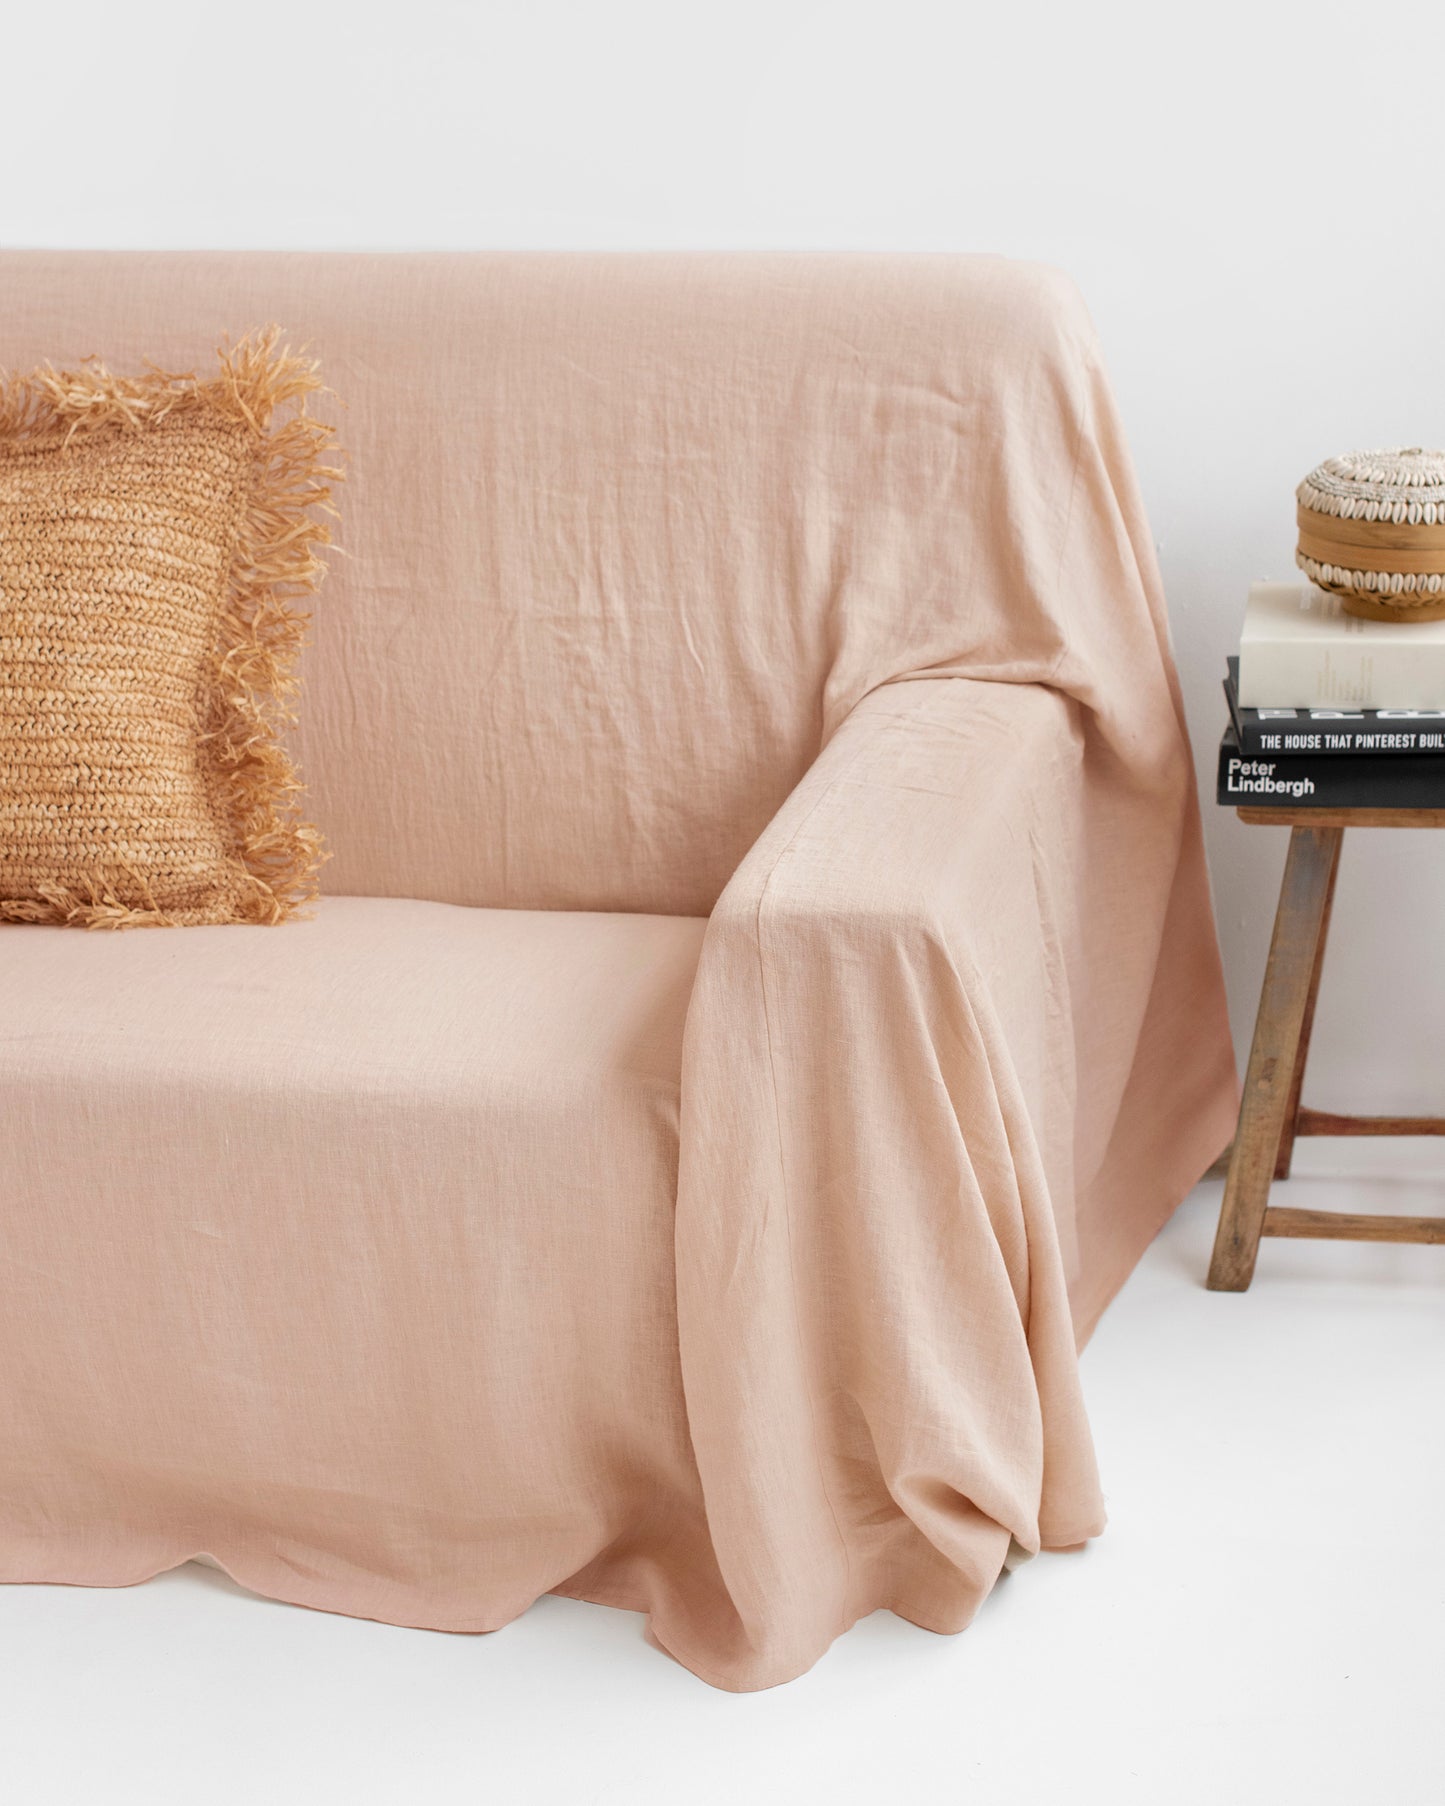 Linen couch cover in Peach - MagicLinen